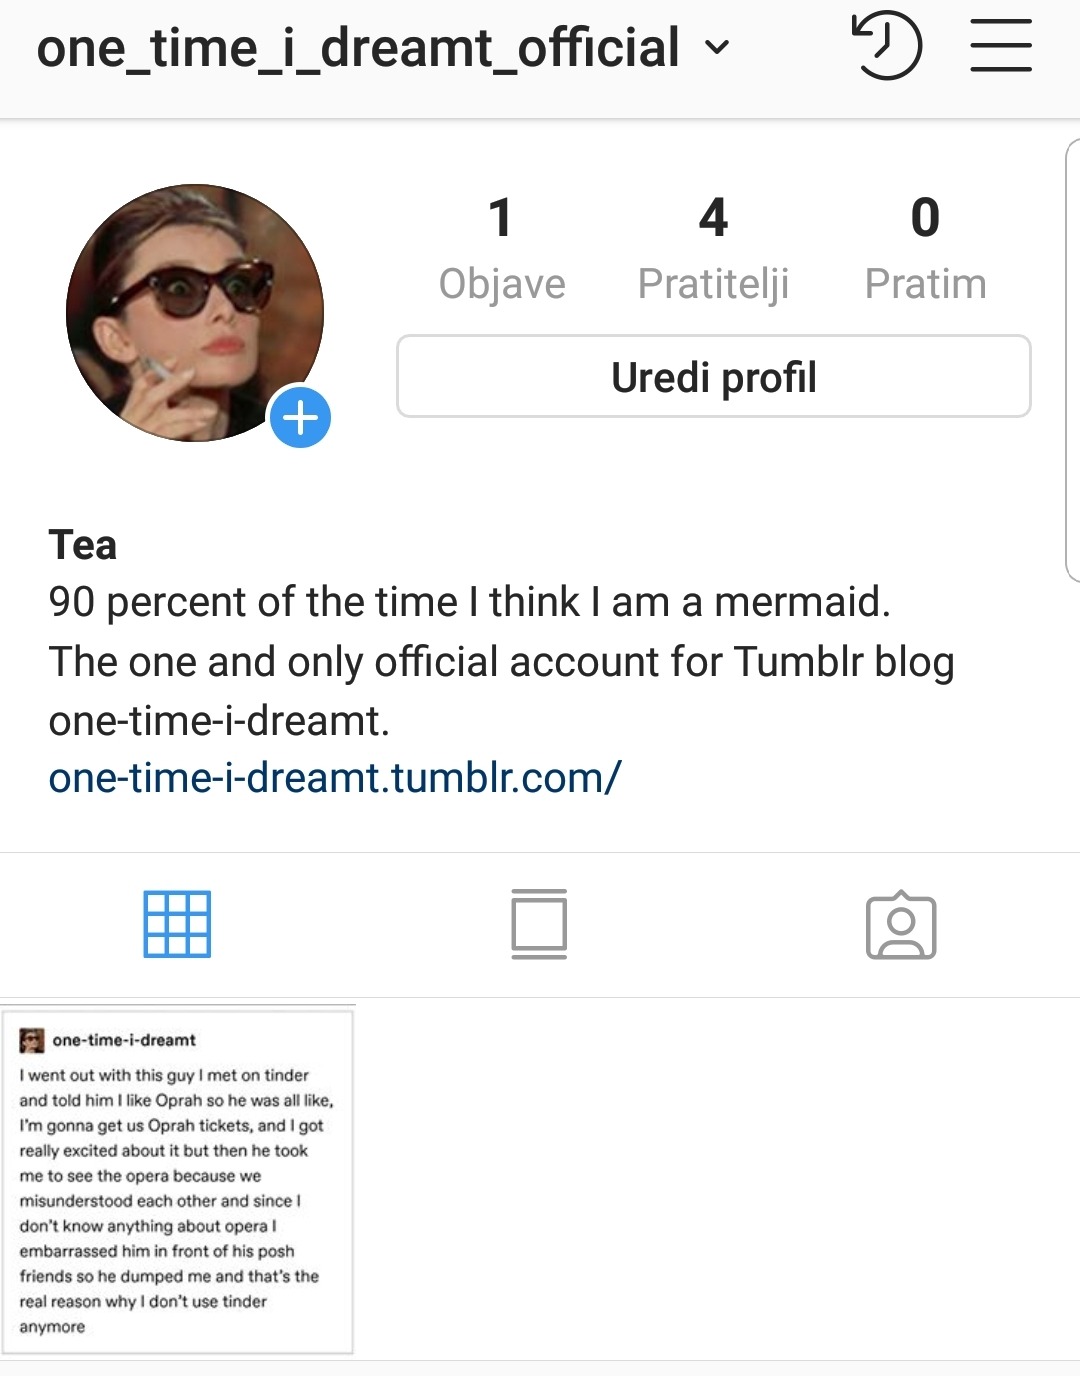 this blog is now on instagram please go follow it if you have an account there - follow on instagram button for tumblr